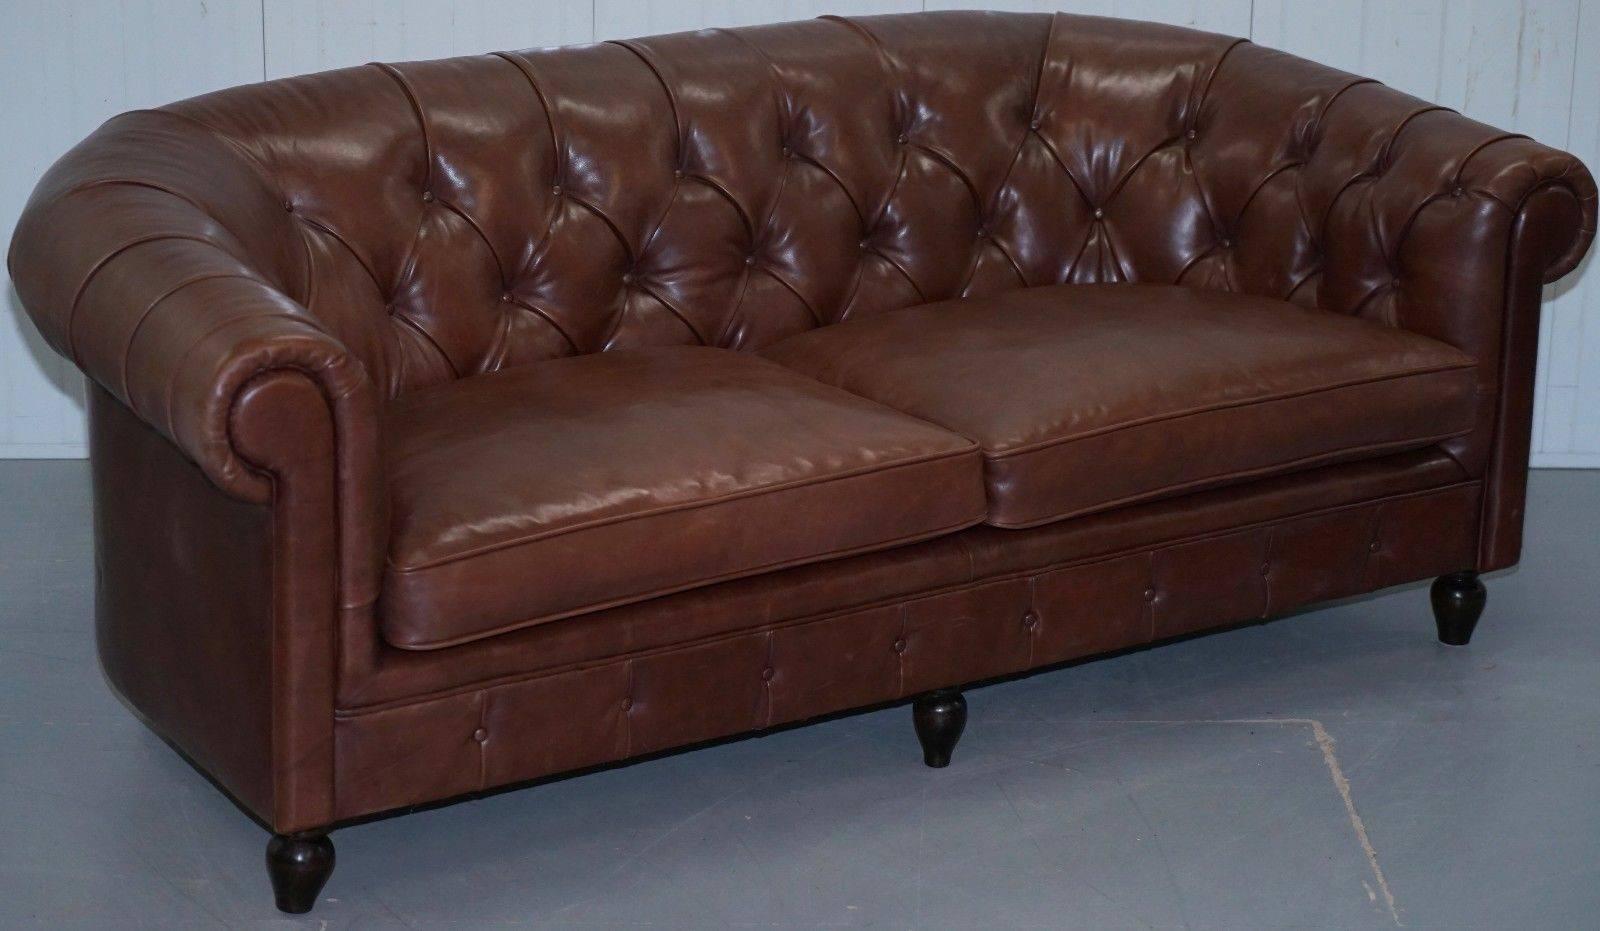 We are delighted to offer for sale this stunning RRP £6999 Bfelix silky soft brown leather Chesterfield brown leather sofa

This is without questions the most luxurious modern Chesterfield sofa I have ever laid my hands on, the leather is so soft